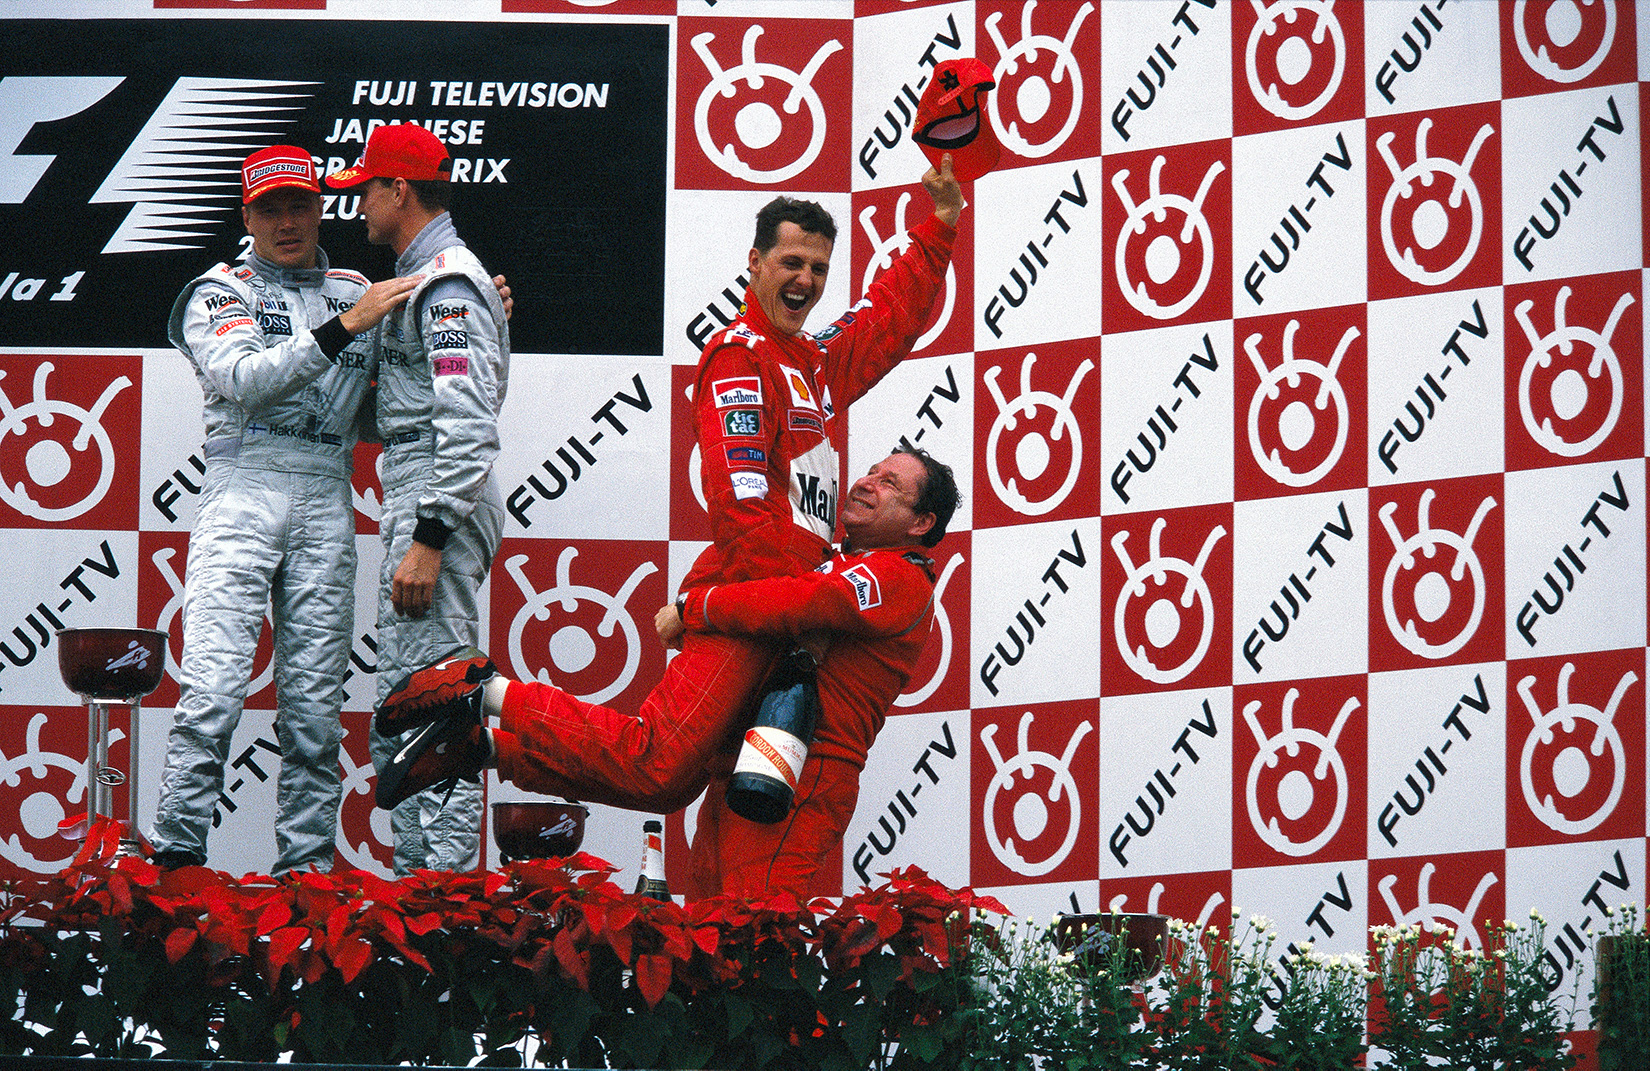 SUZUKA, JAPAN - OCTOBER 08: Ferrari team manager Jean Todt lifts Michael Schumacher, Ferrari, 1st position, in the air as they celebrate on the podium. Mika Häkkinen, 2nd position, and McLaren team-mate David Coulthard, 3rd position, are also present during the Japanese GP at Suzuka on October 08, 2000 in Suzuka, Japan.